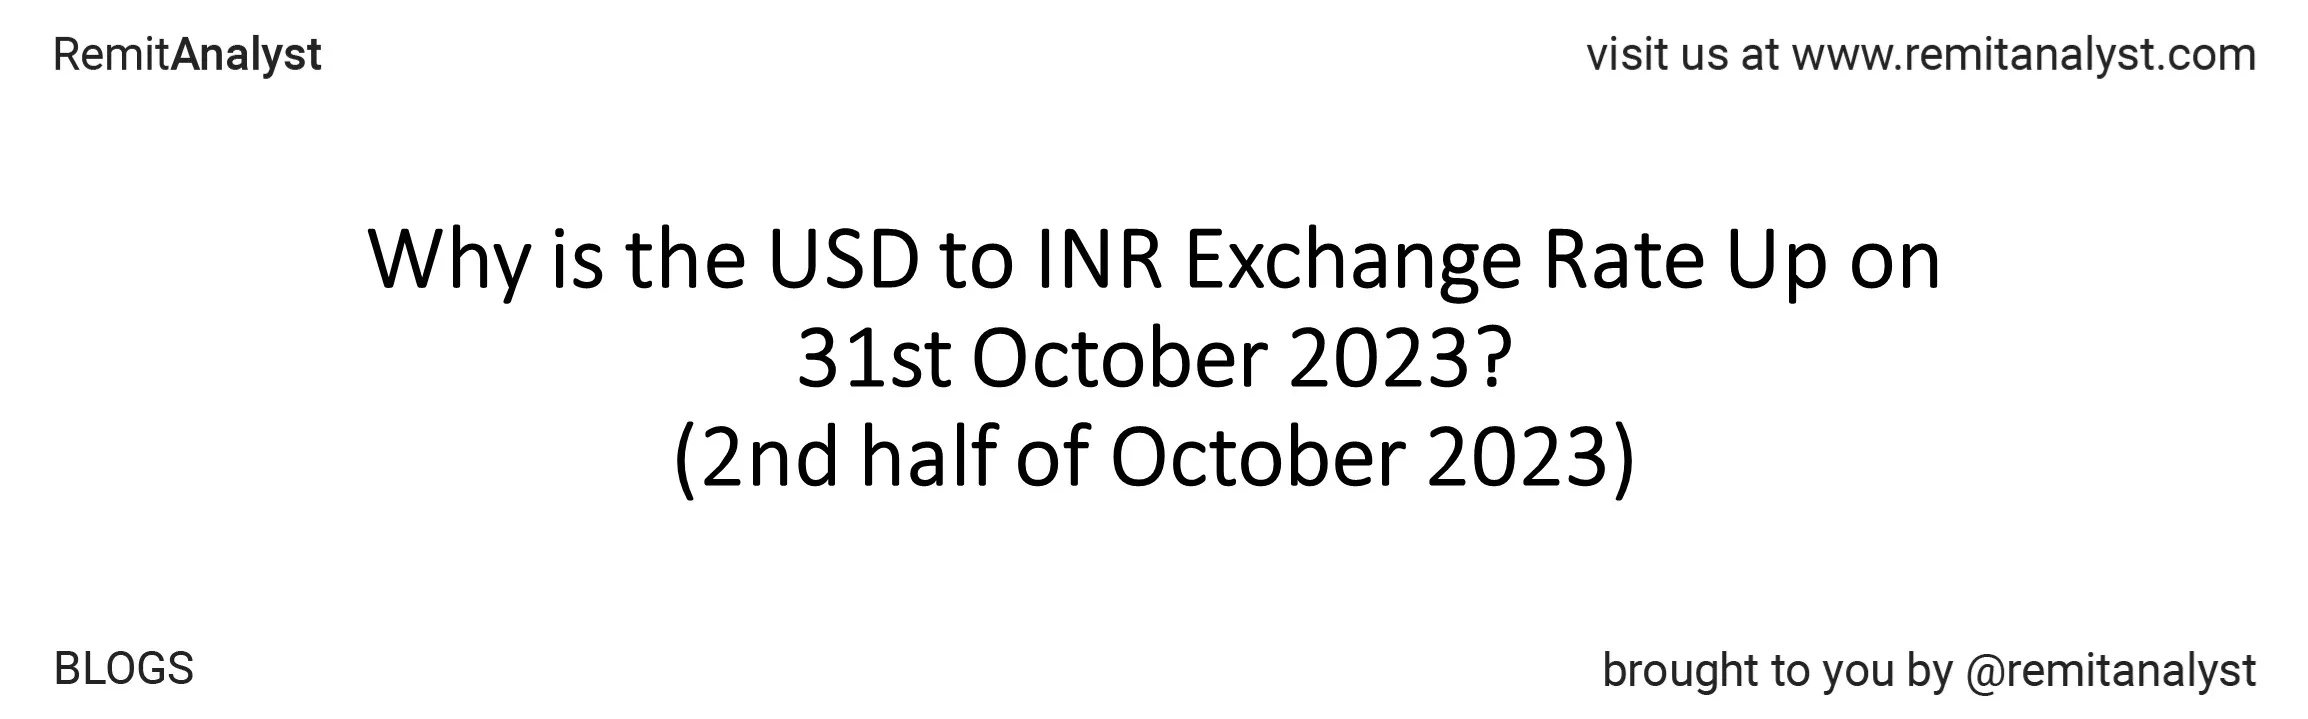 usd-to-inr-exchange-rate-16-oct-2023-to-31-oct-2023-title